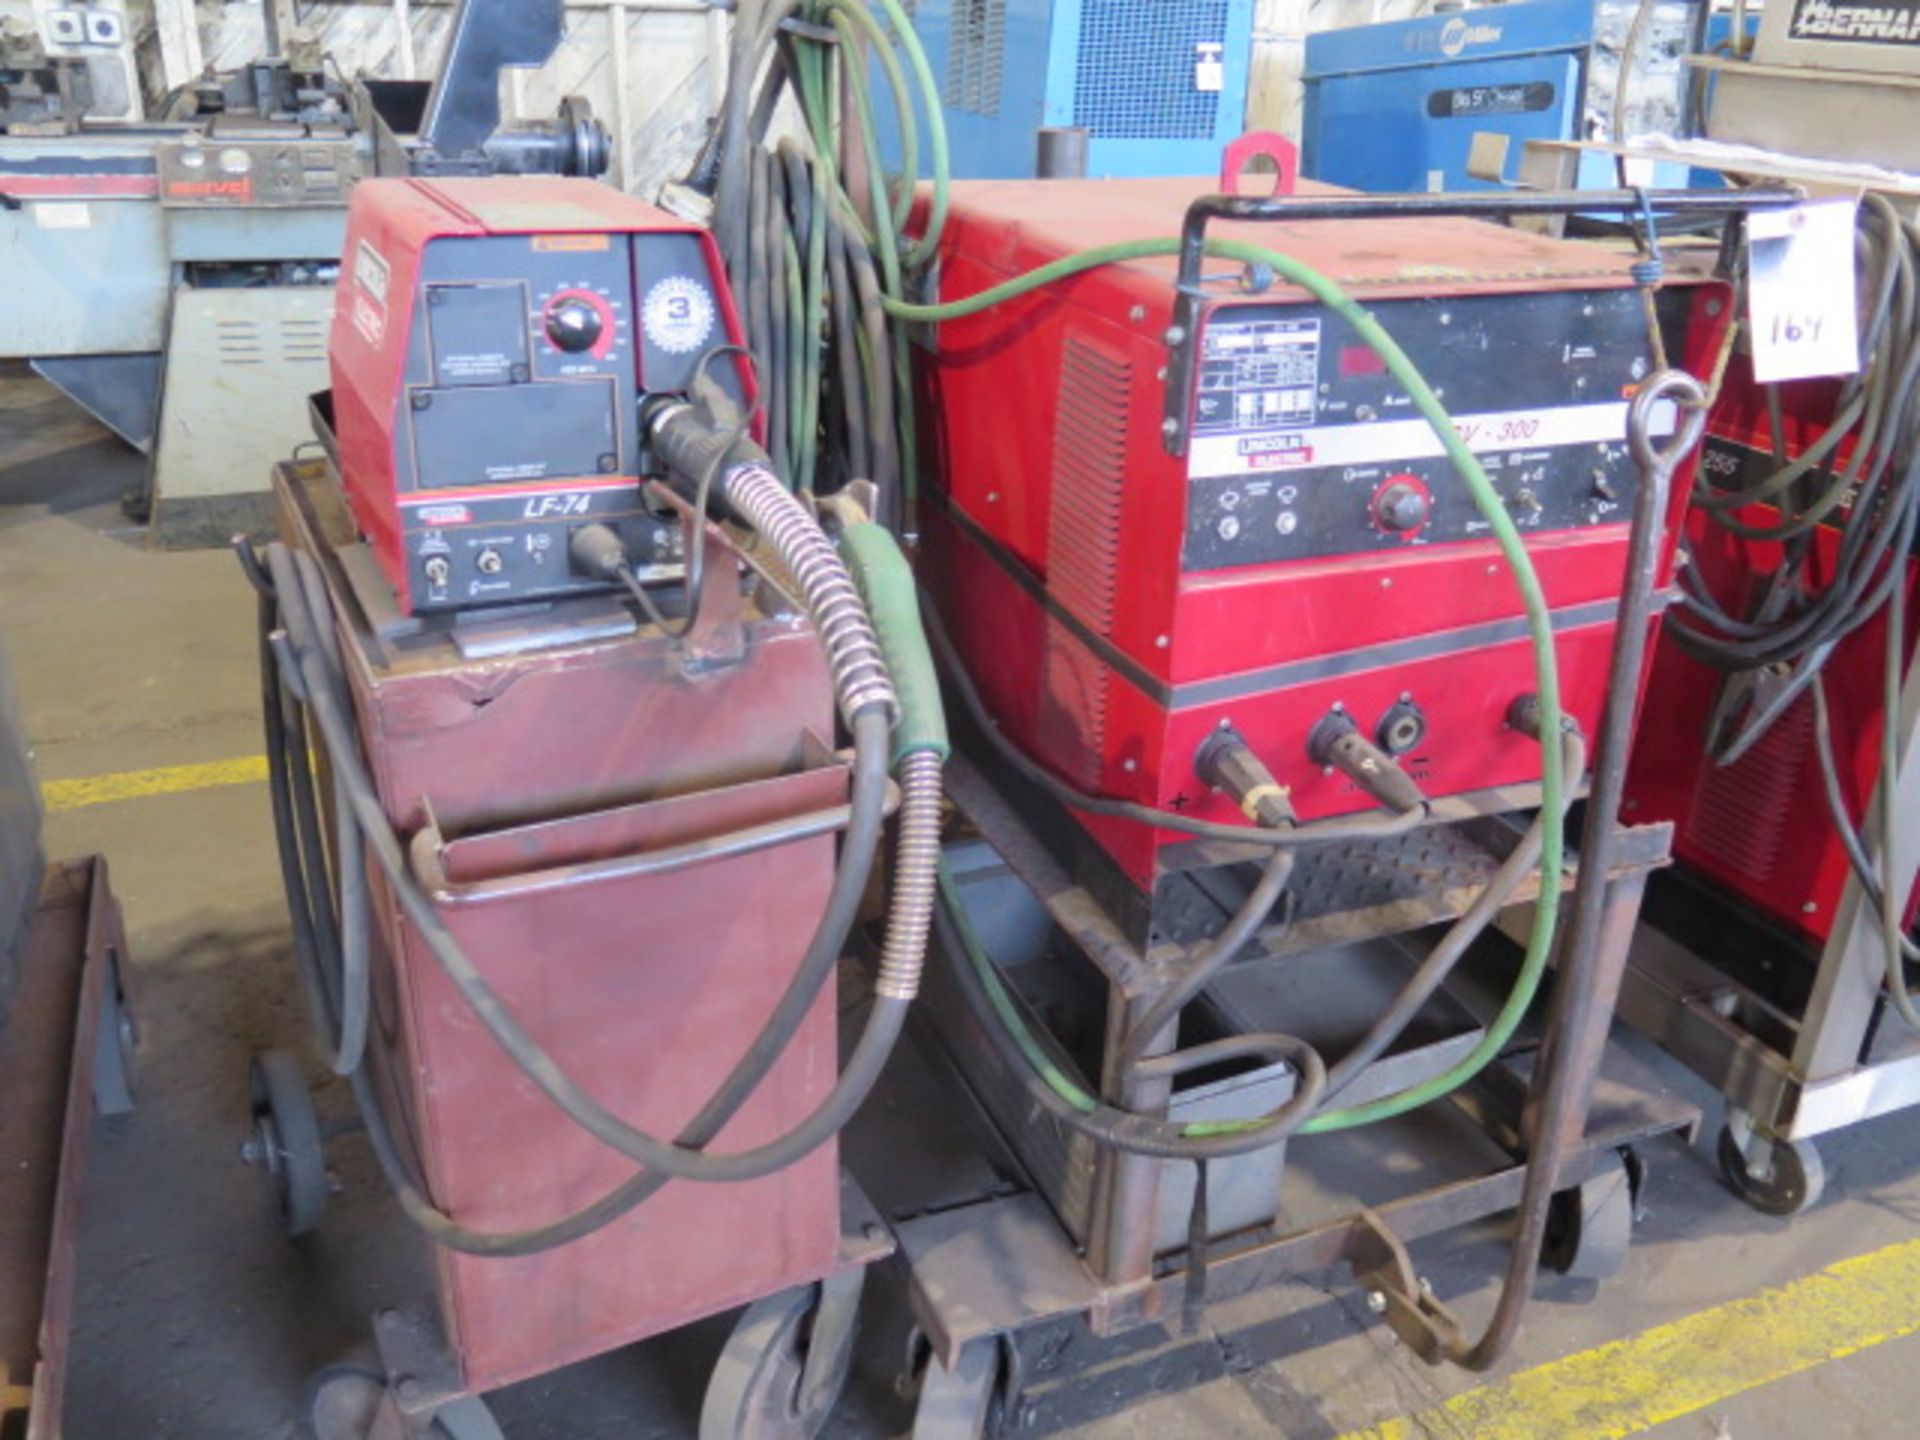 Lincoln CV-300 Arc Welding Power Source w/ Lincoln LF-74 Wire Feeder (SOLD AS-IS - NO WARRANTY) - Image 4 of 8